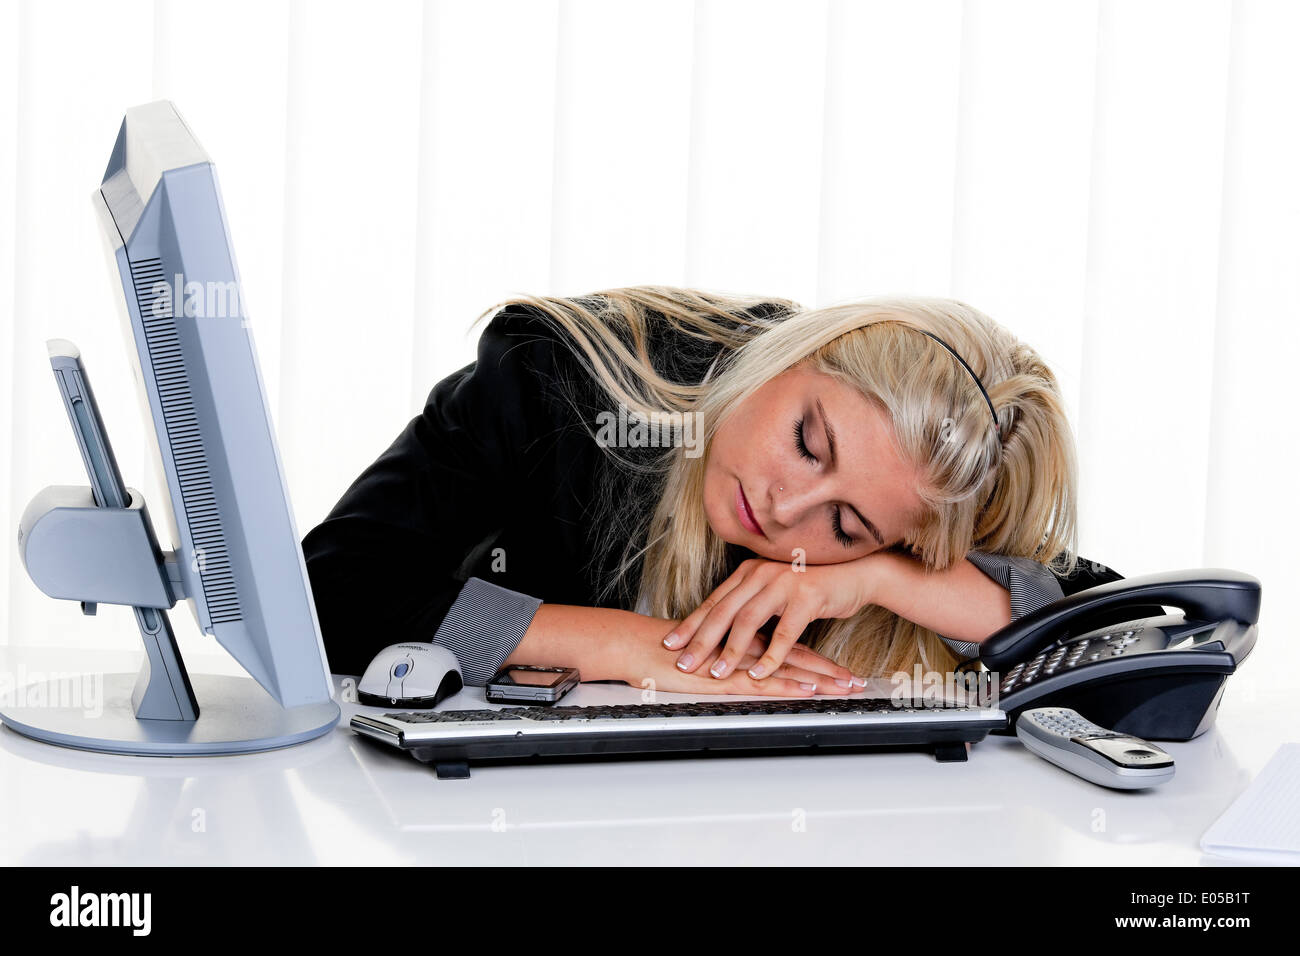 Young woman with problems and stress in the office, Junge Frau mit Problemen und Stress im Buero Stock Photo